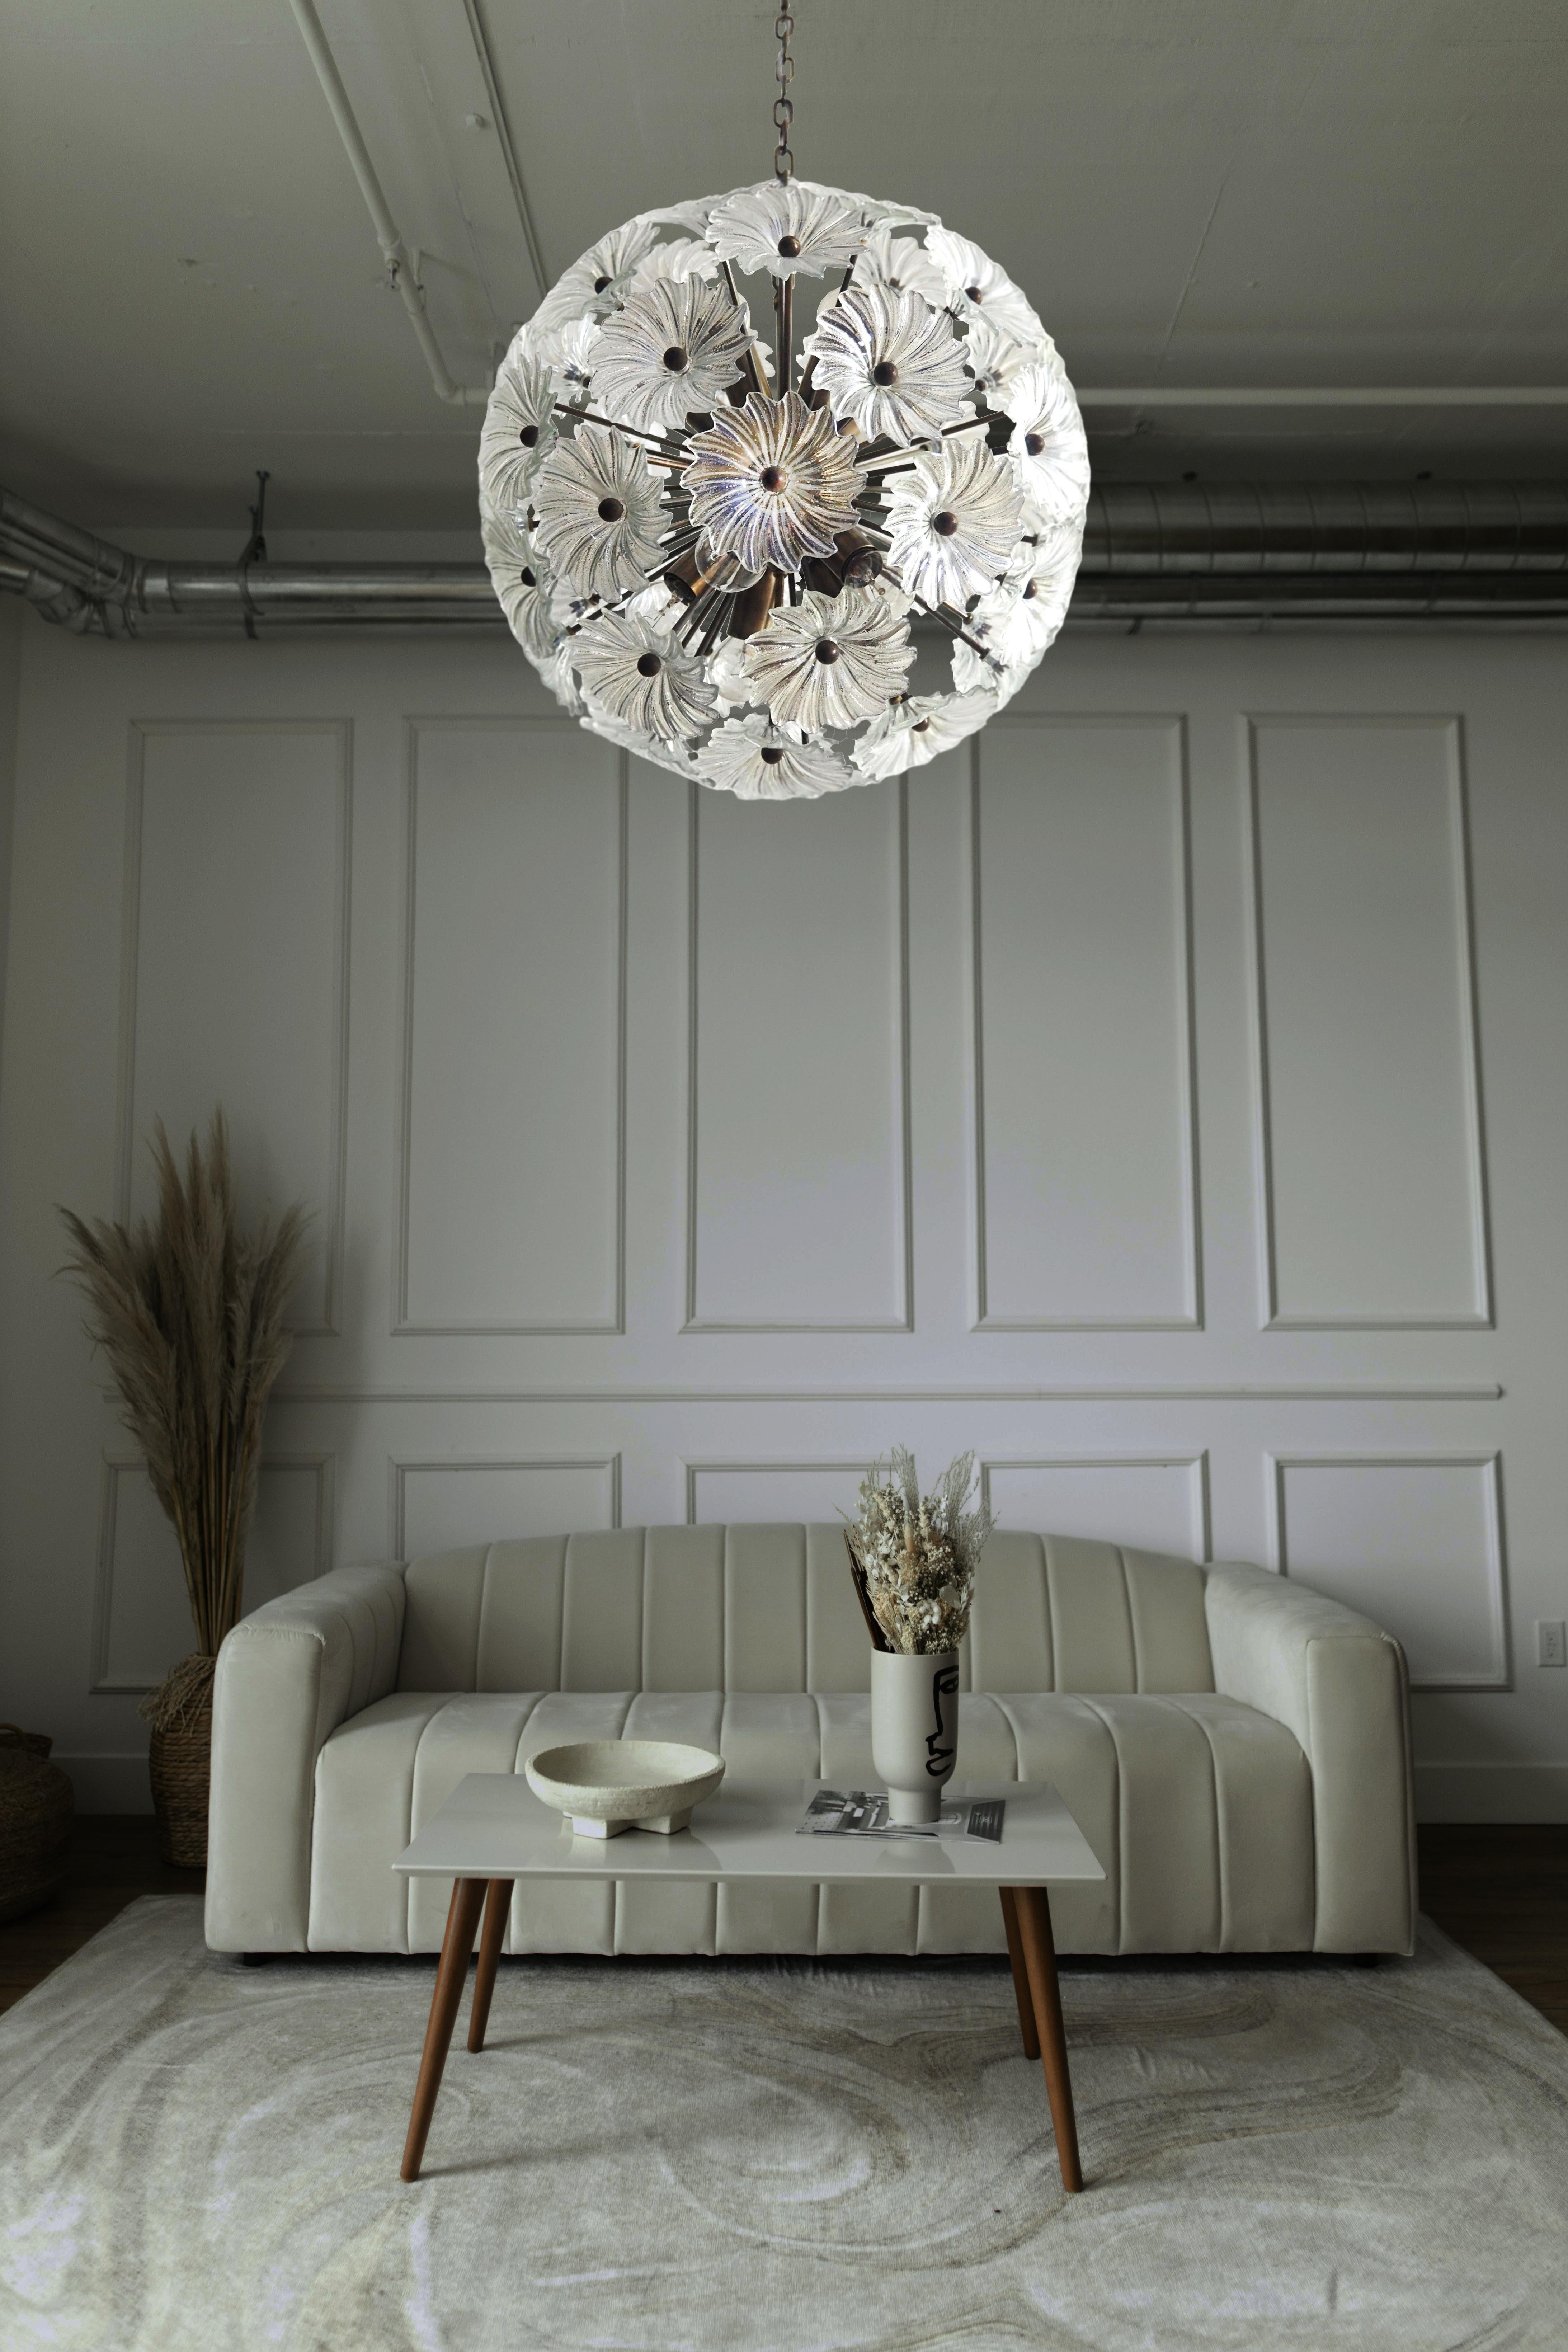 Sputnik space age Italian vintage crystal chandelier made by 51 transparent crystals in a burnished brass metal frame. Elegant lighting object.
Period: late XX century
Dimensions: 39 inches (100 cm) height with chain; 17,70 inches (45 cm) height